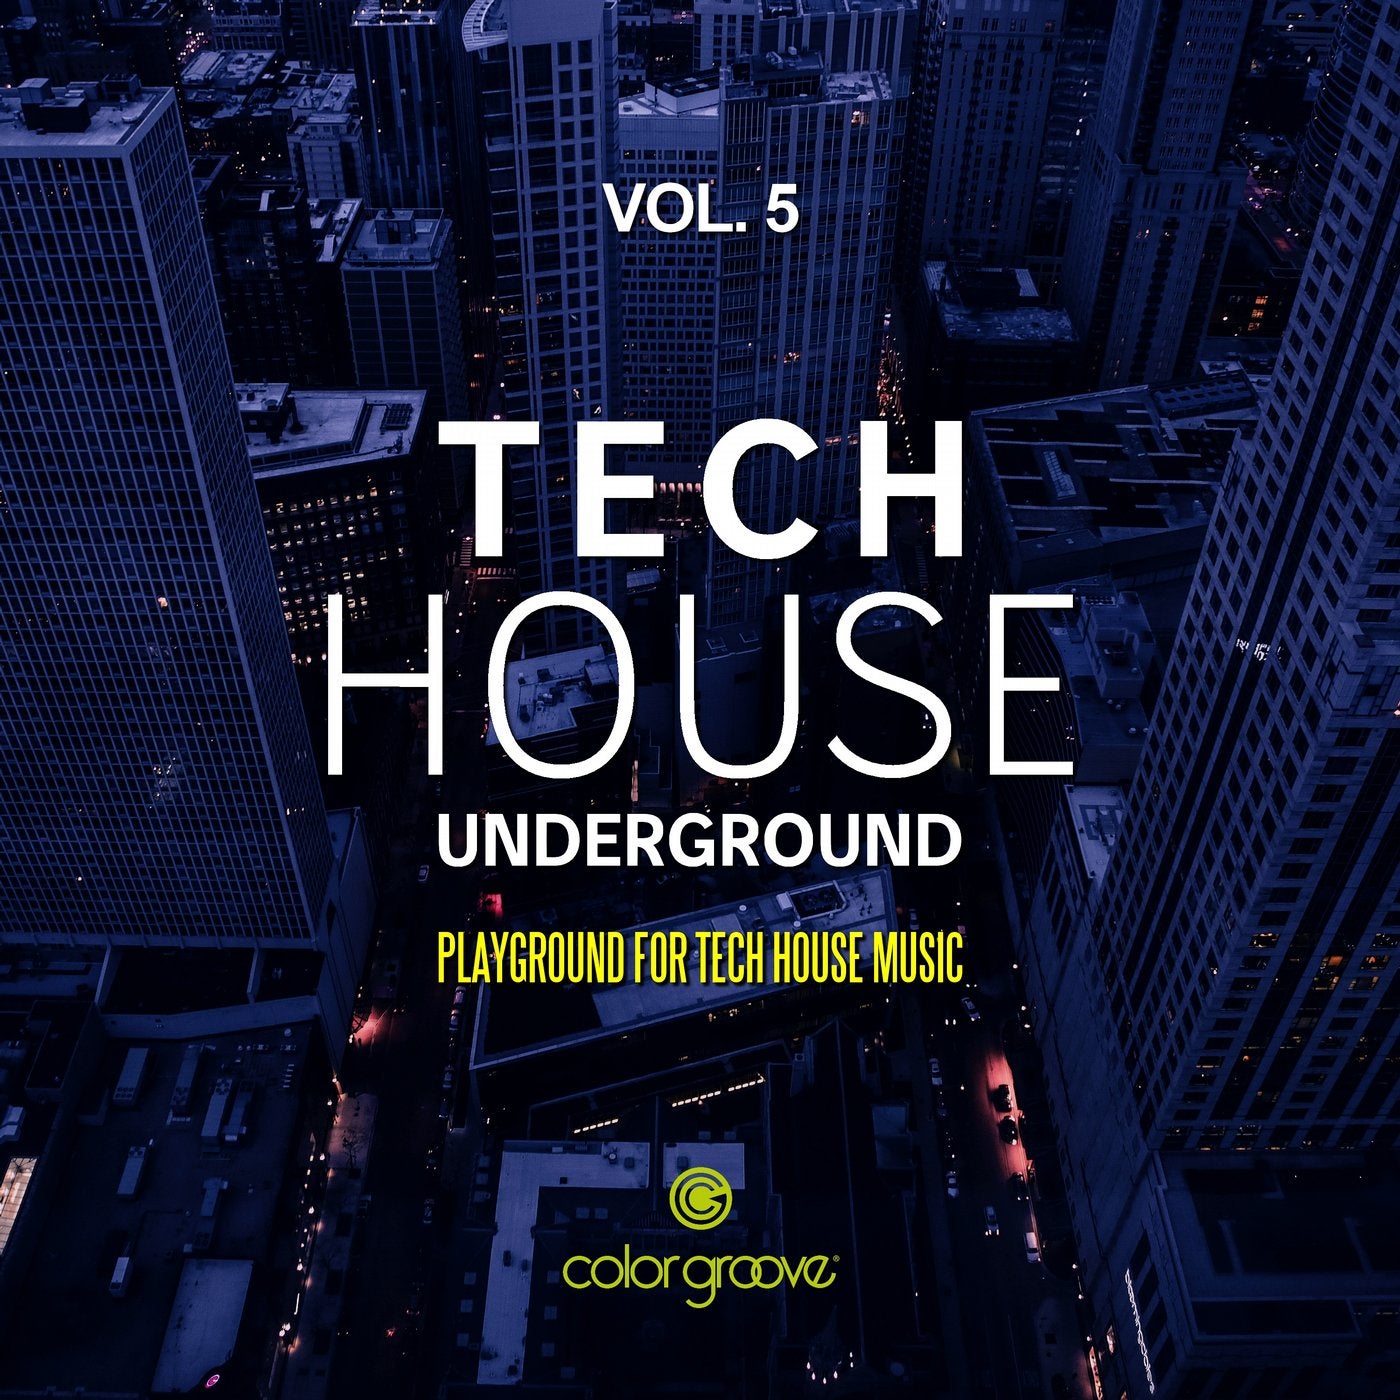 Tech House Underground, Vol. 5 (Playground For Tech House Music)